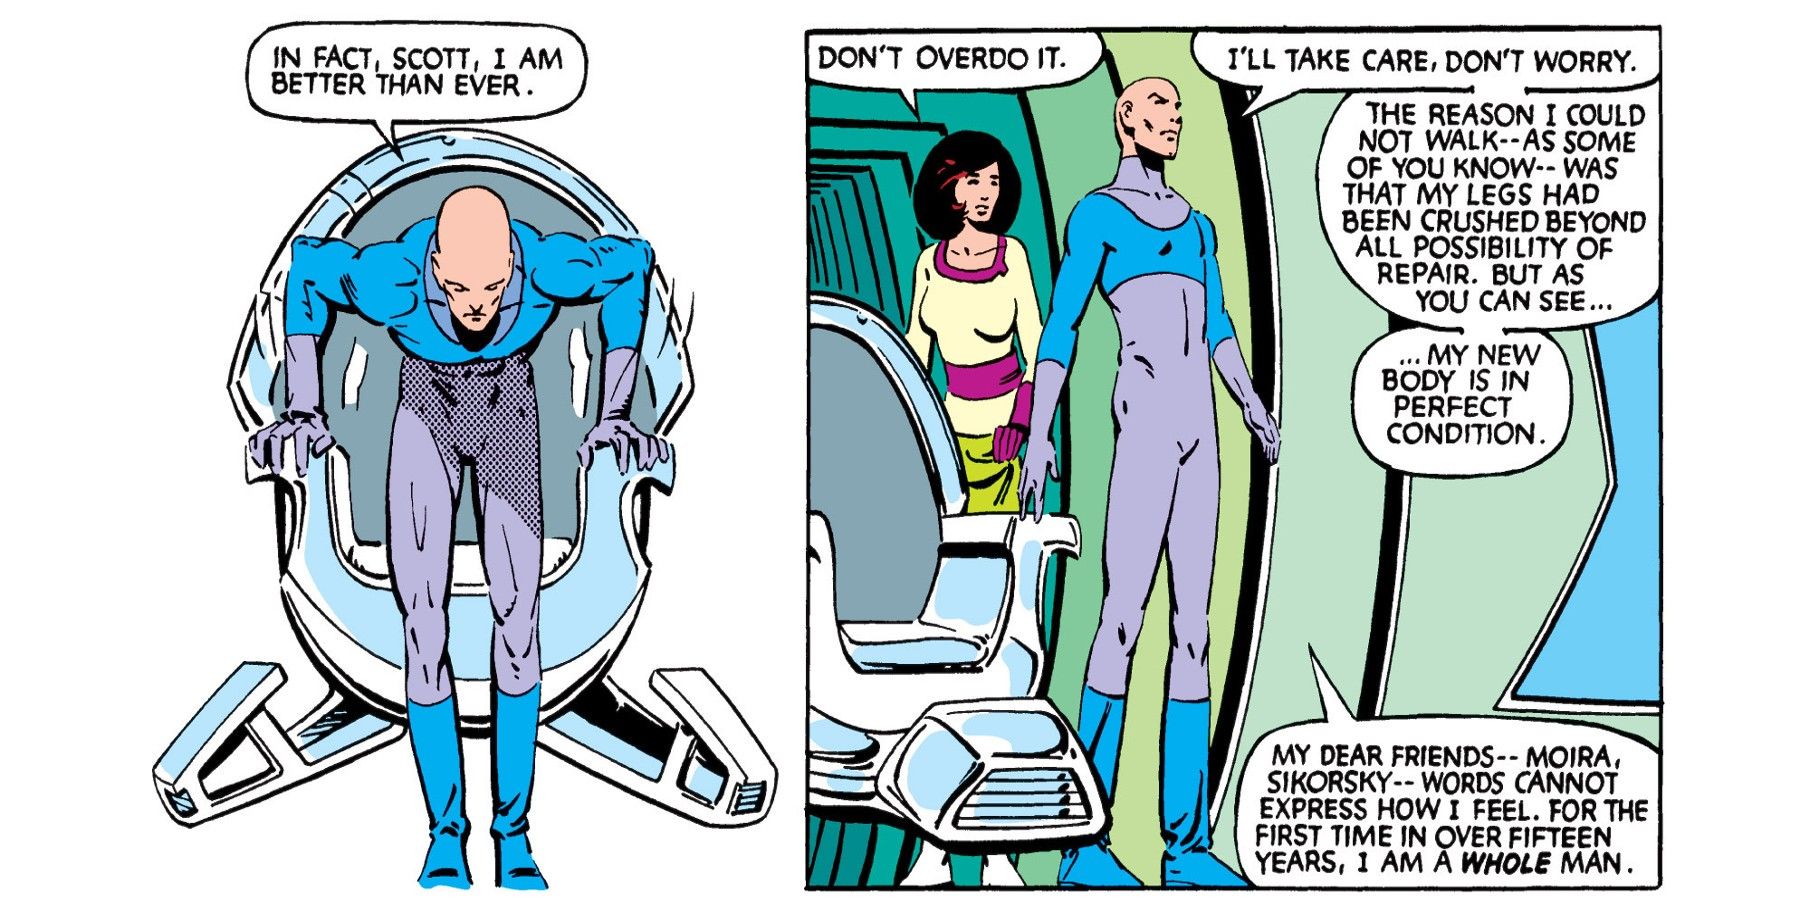 Uncanny X-Men #167 shows Professor X rise from his wheelchair while in a new body